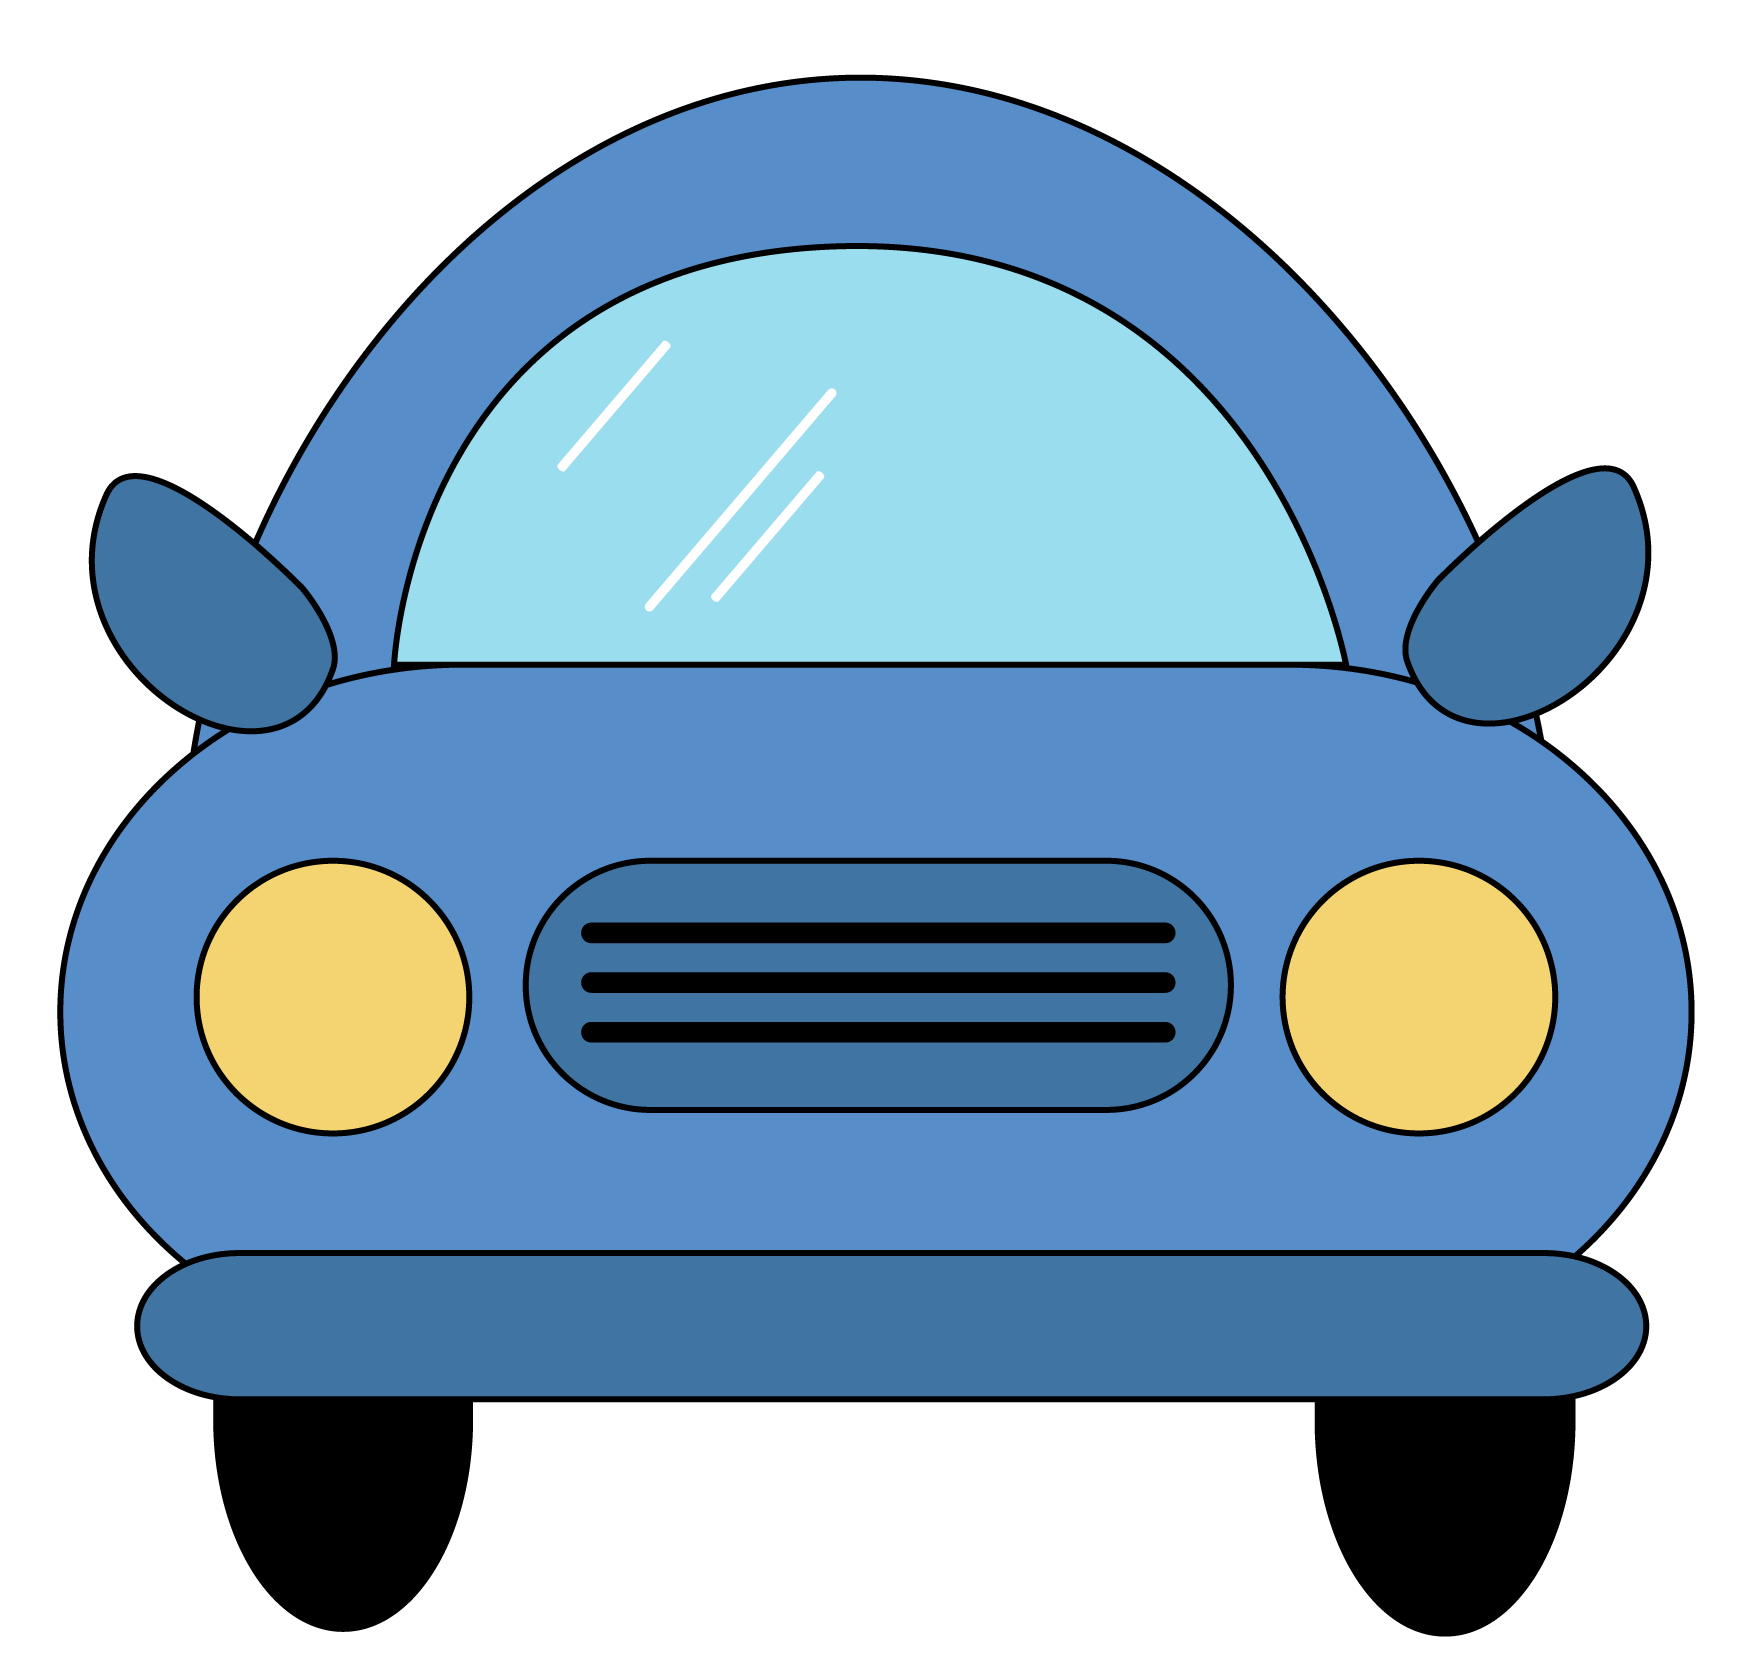 Cartoon Car PNG Clipart - Download free Car images in PNG